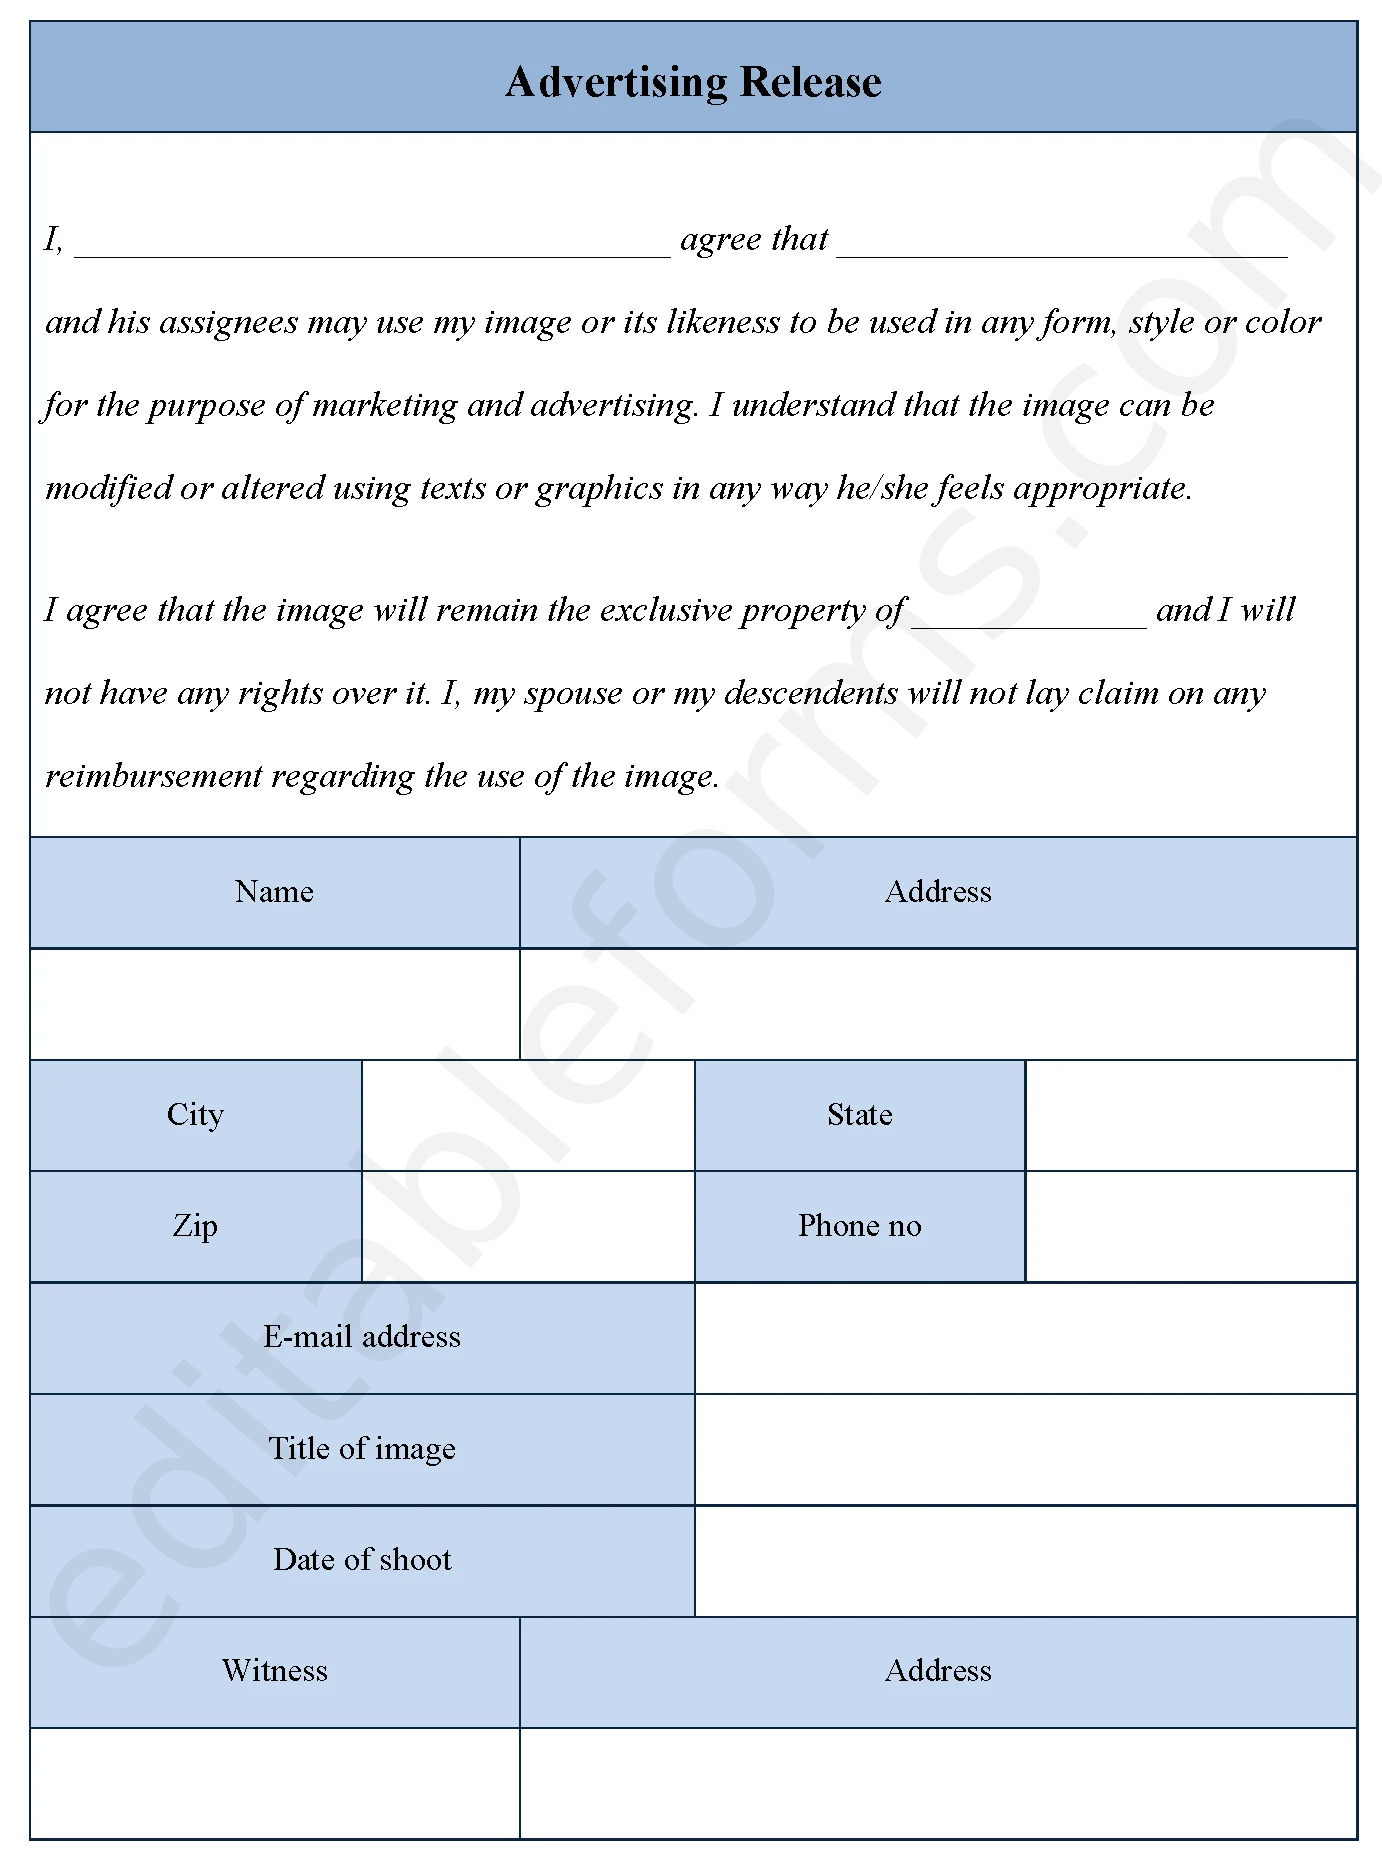 Advertising Release Fillable PDF Template